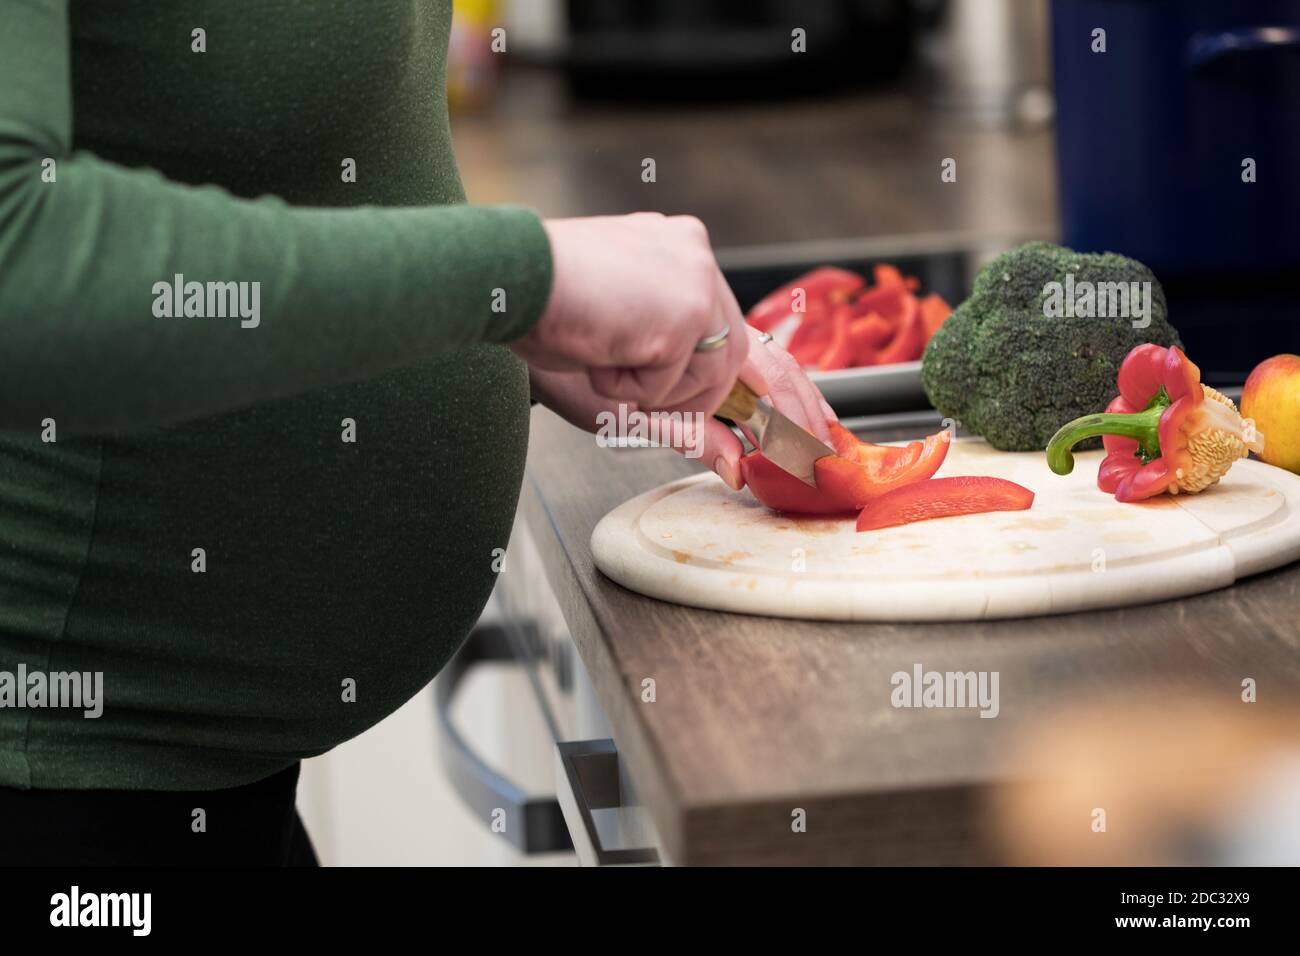 Bruchhausen Vilsen, Germany. 24th Jan, 2018. To prevent a vitamin deficiency in the unborn child, pregnant women who are vegan or vegetarian may be advised to take dietary supplements. Credit: Christin Klose/dpa-mag/dpa/Alamy Live News Stock Photo